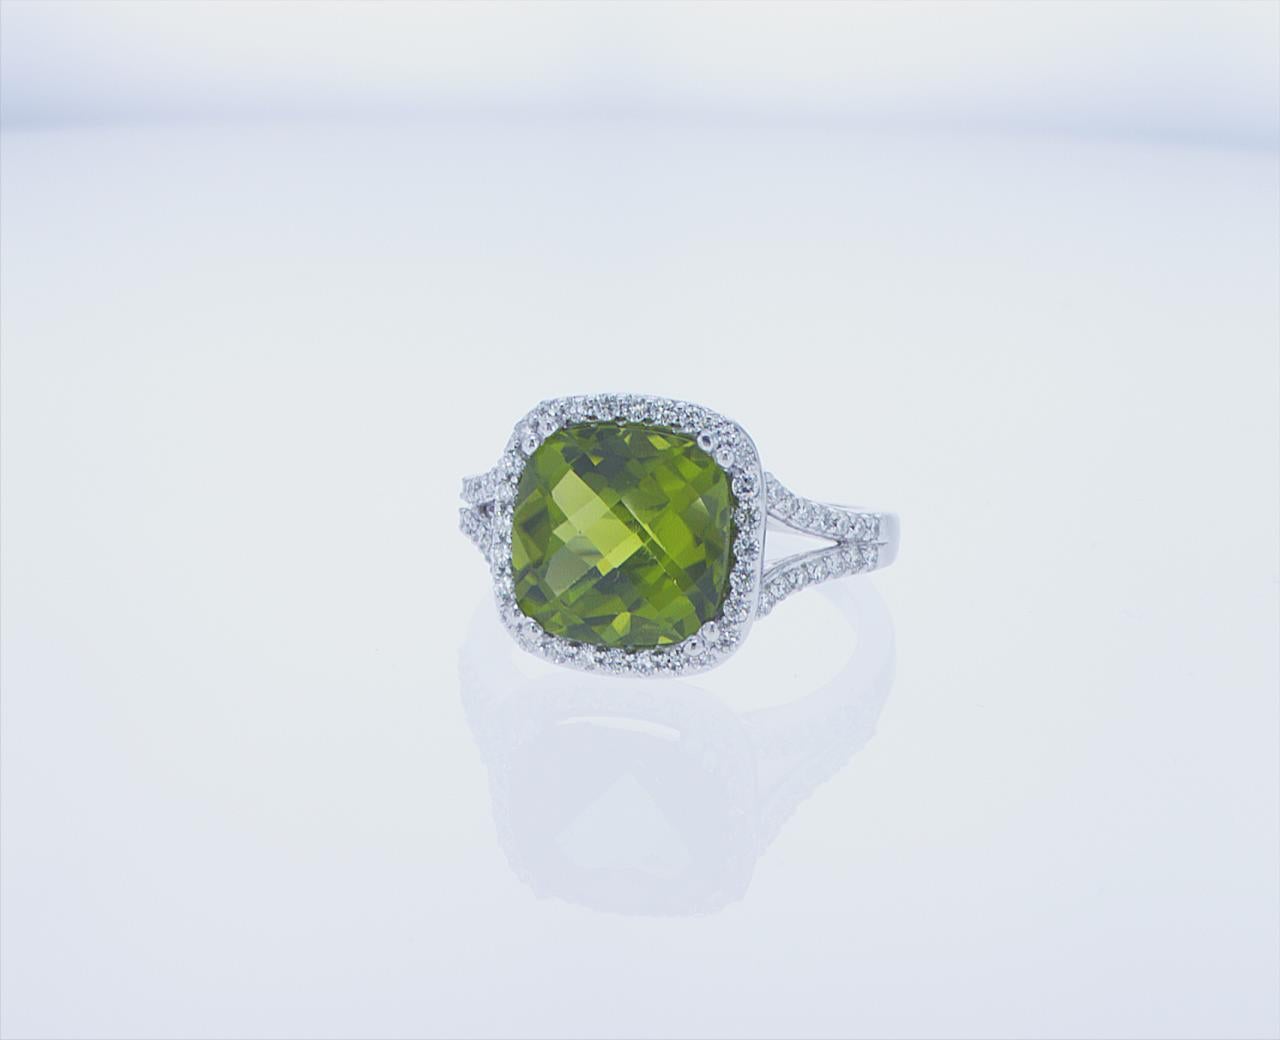 5.18ct Cushion Peridot with 0.43ct Total Weight of G/H Color, VS Clarity Accent Diamonds. 14k White Gold Mounting.
